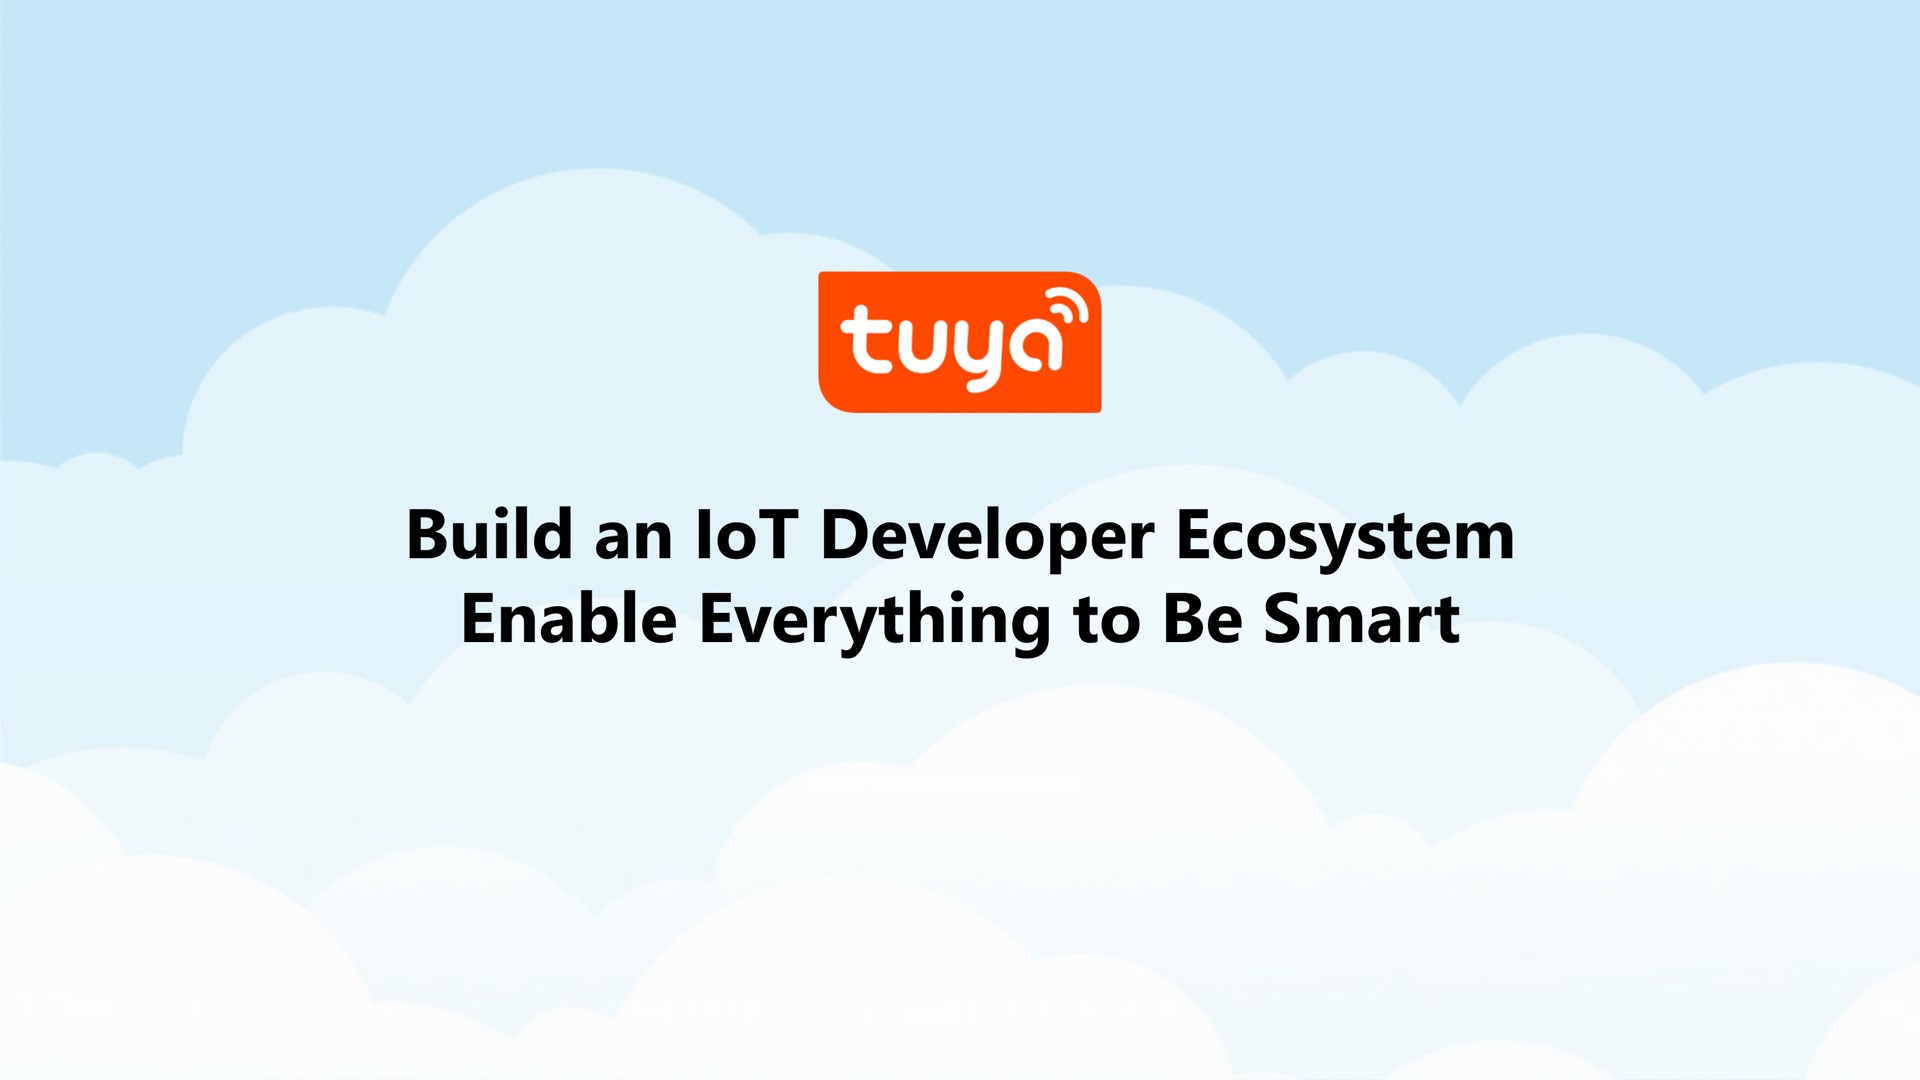 build an developer ecosystem enable everything to be smart a lot | Tuya